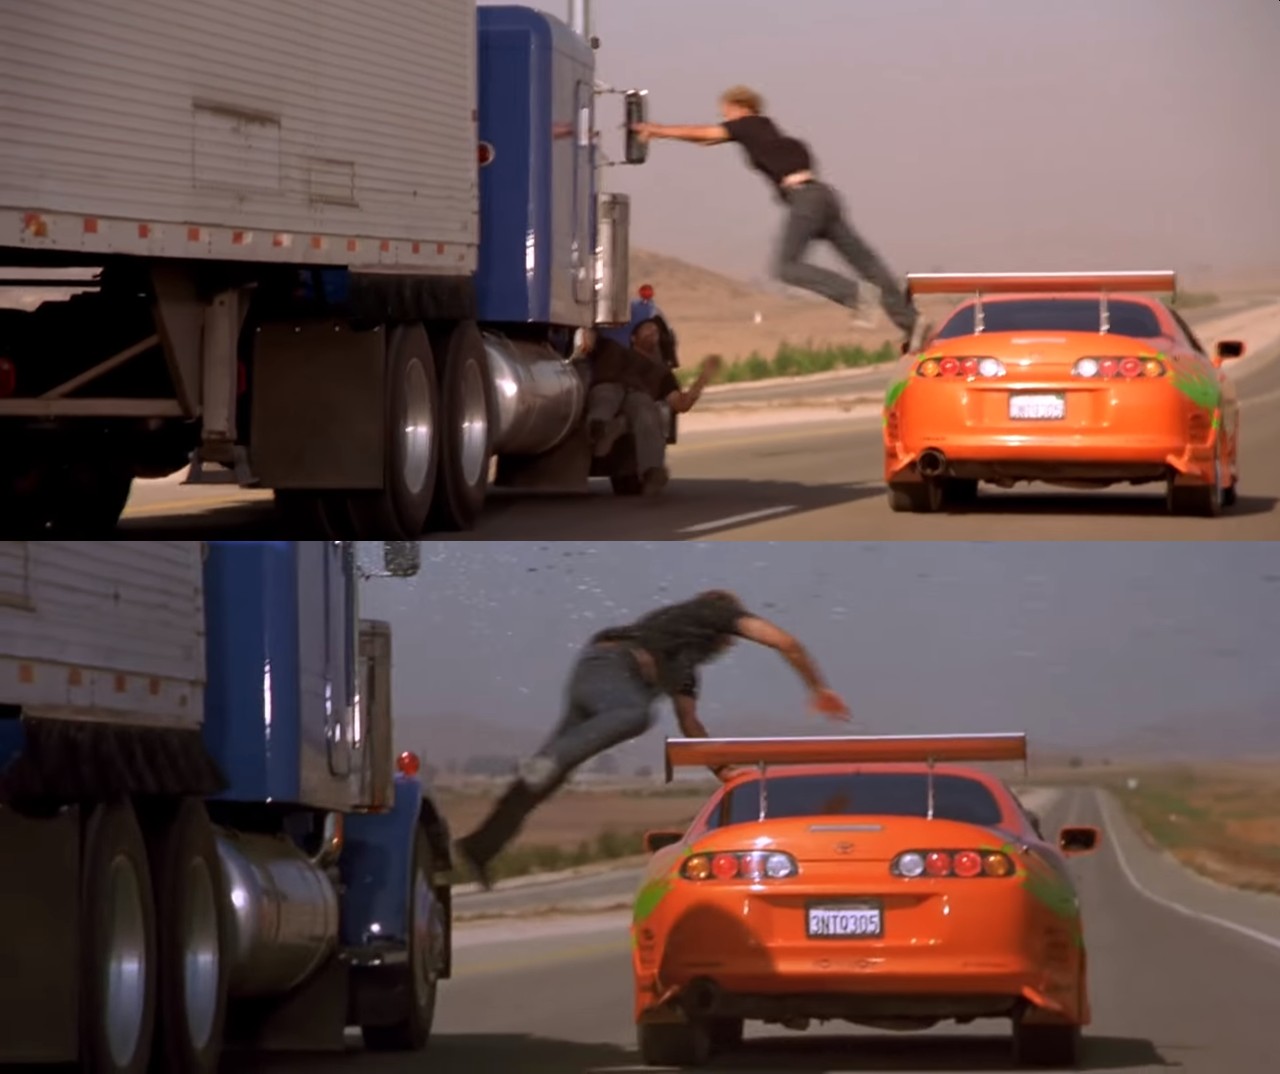 Truck Fast and Furious Blank Meme Template